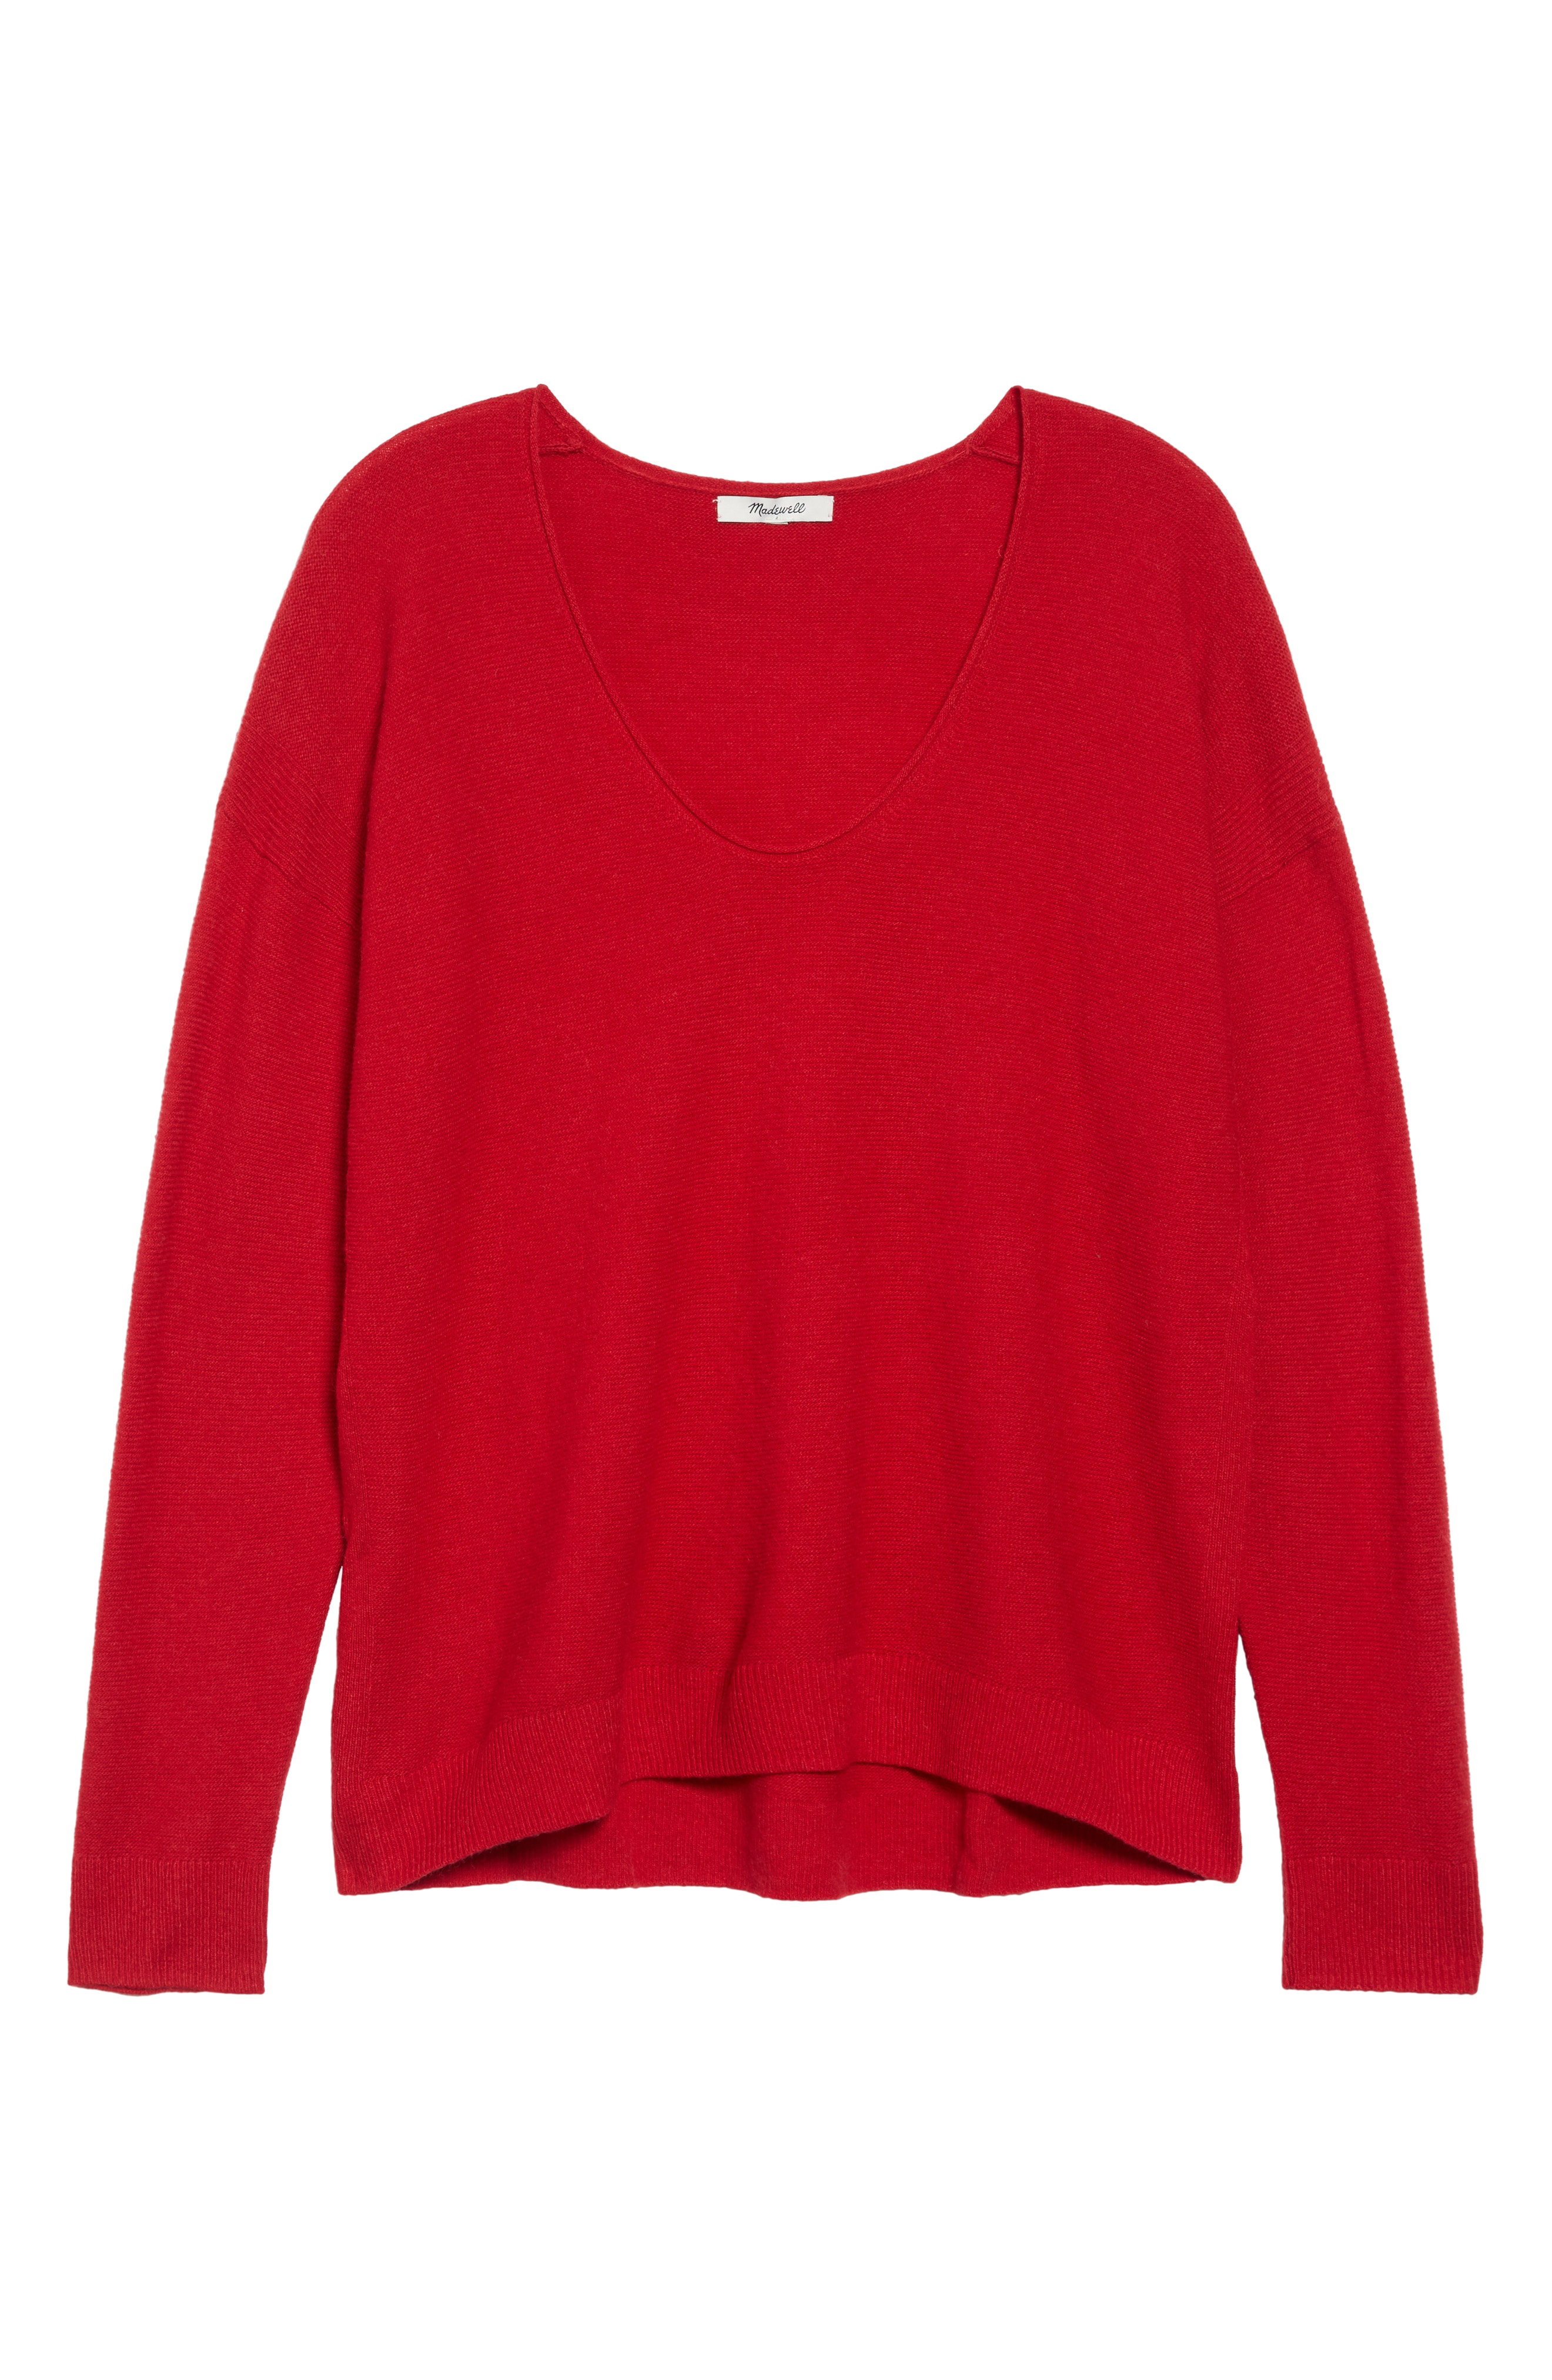 Women's Red Sweaters | Nordstrom